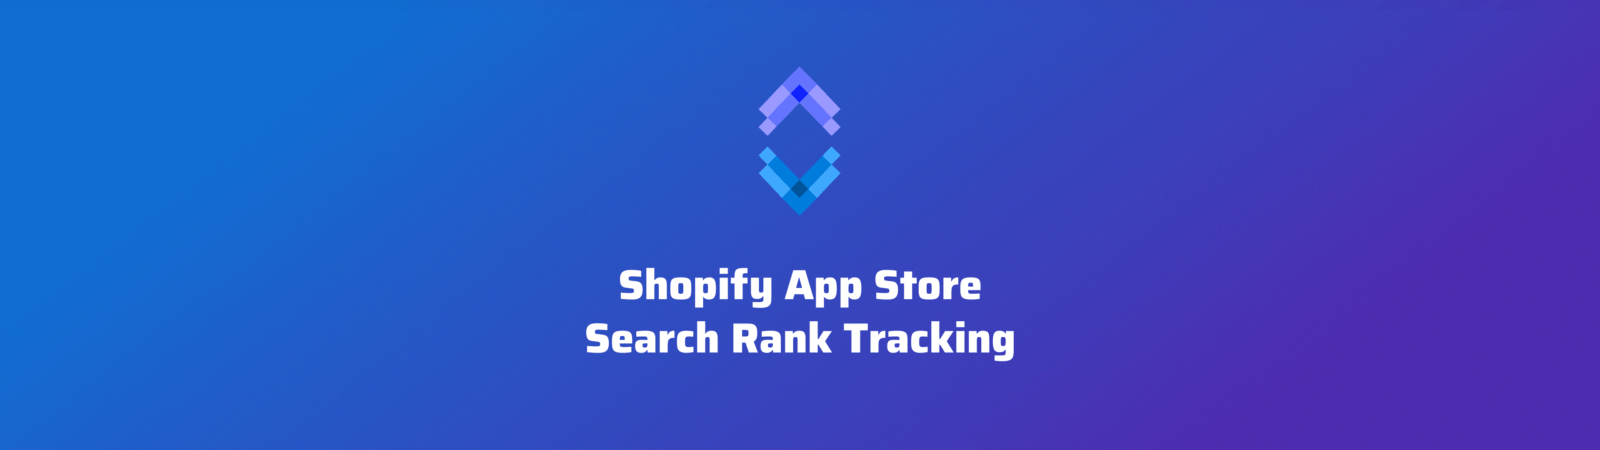 search-rank-tracking (1)